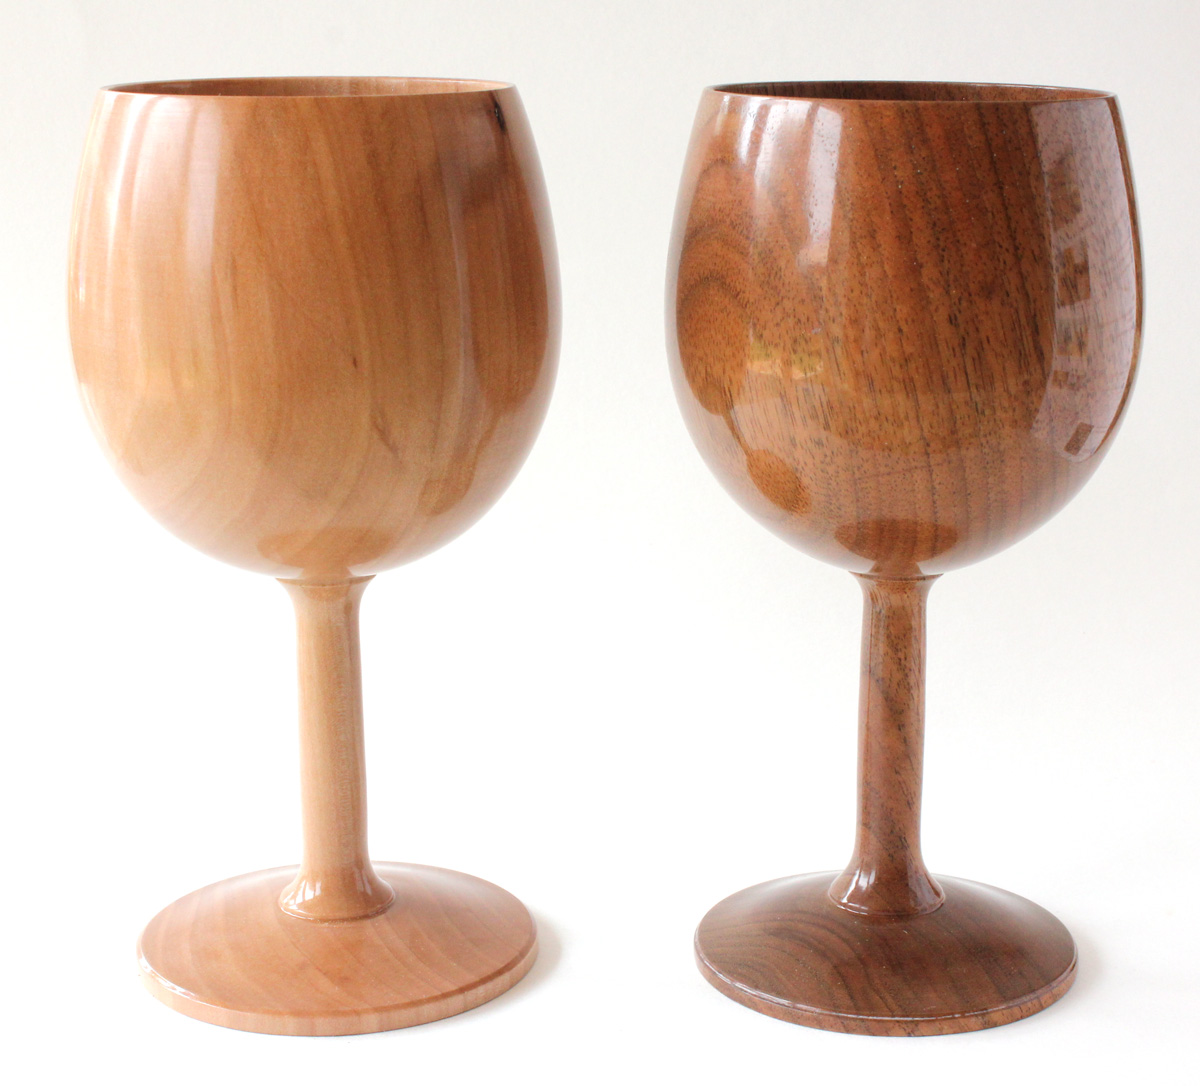 Turned wooden goblets  Creative Woodturning